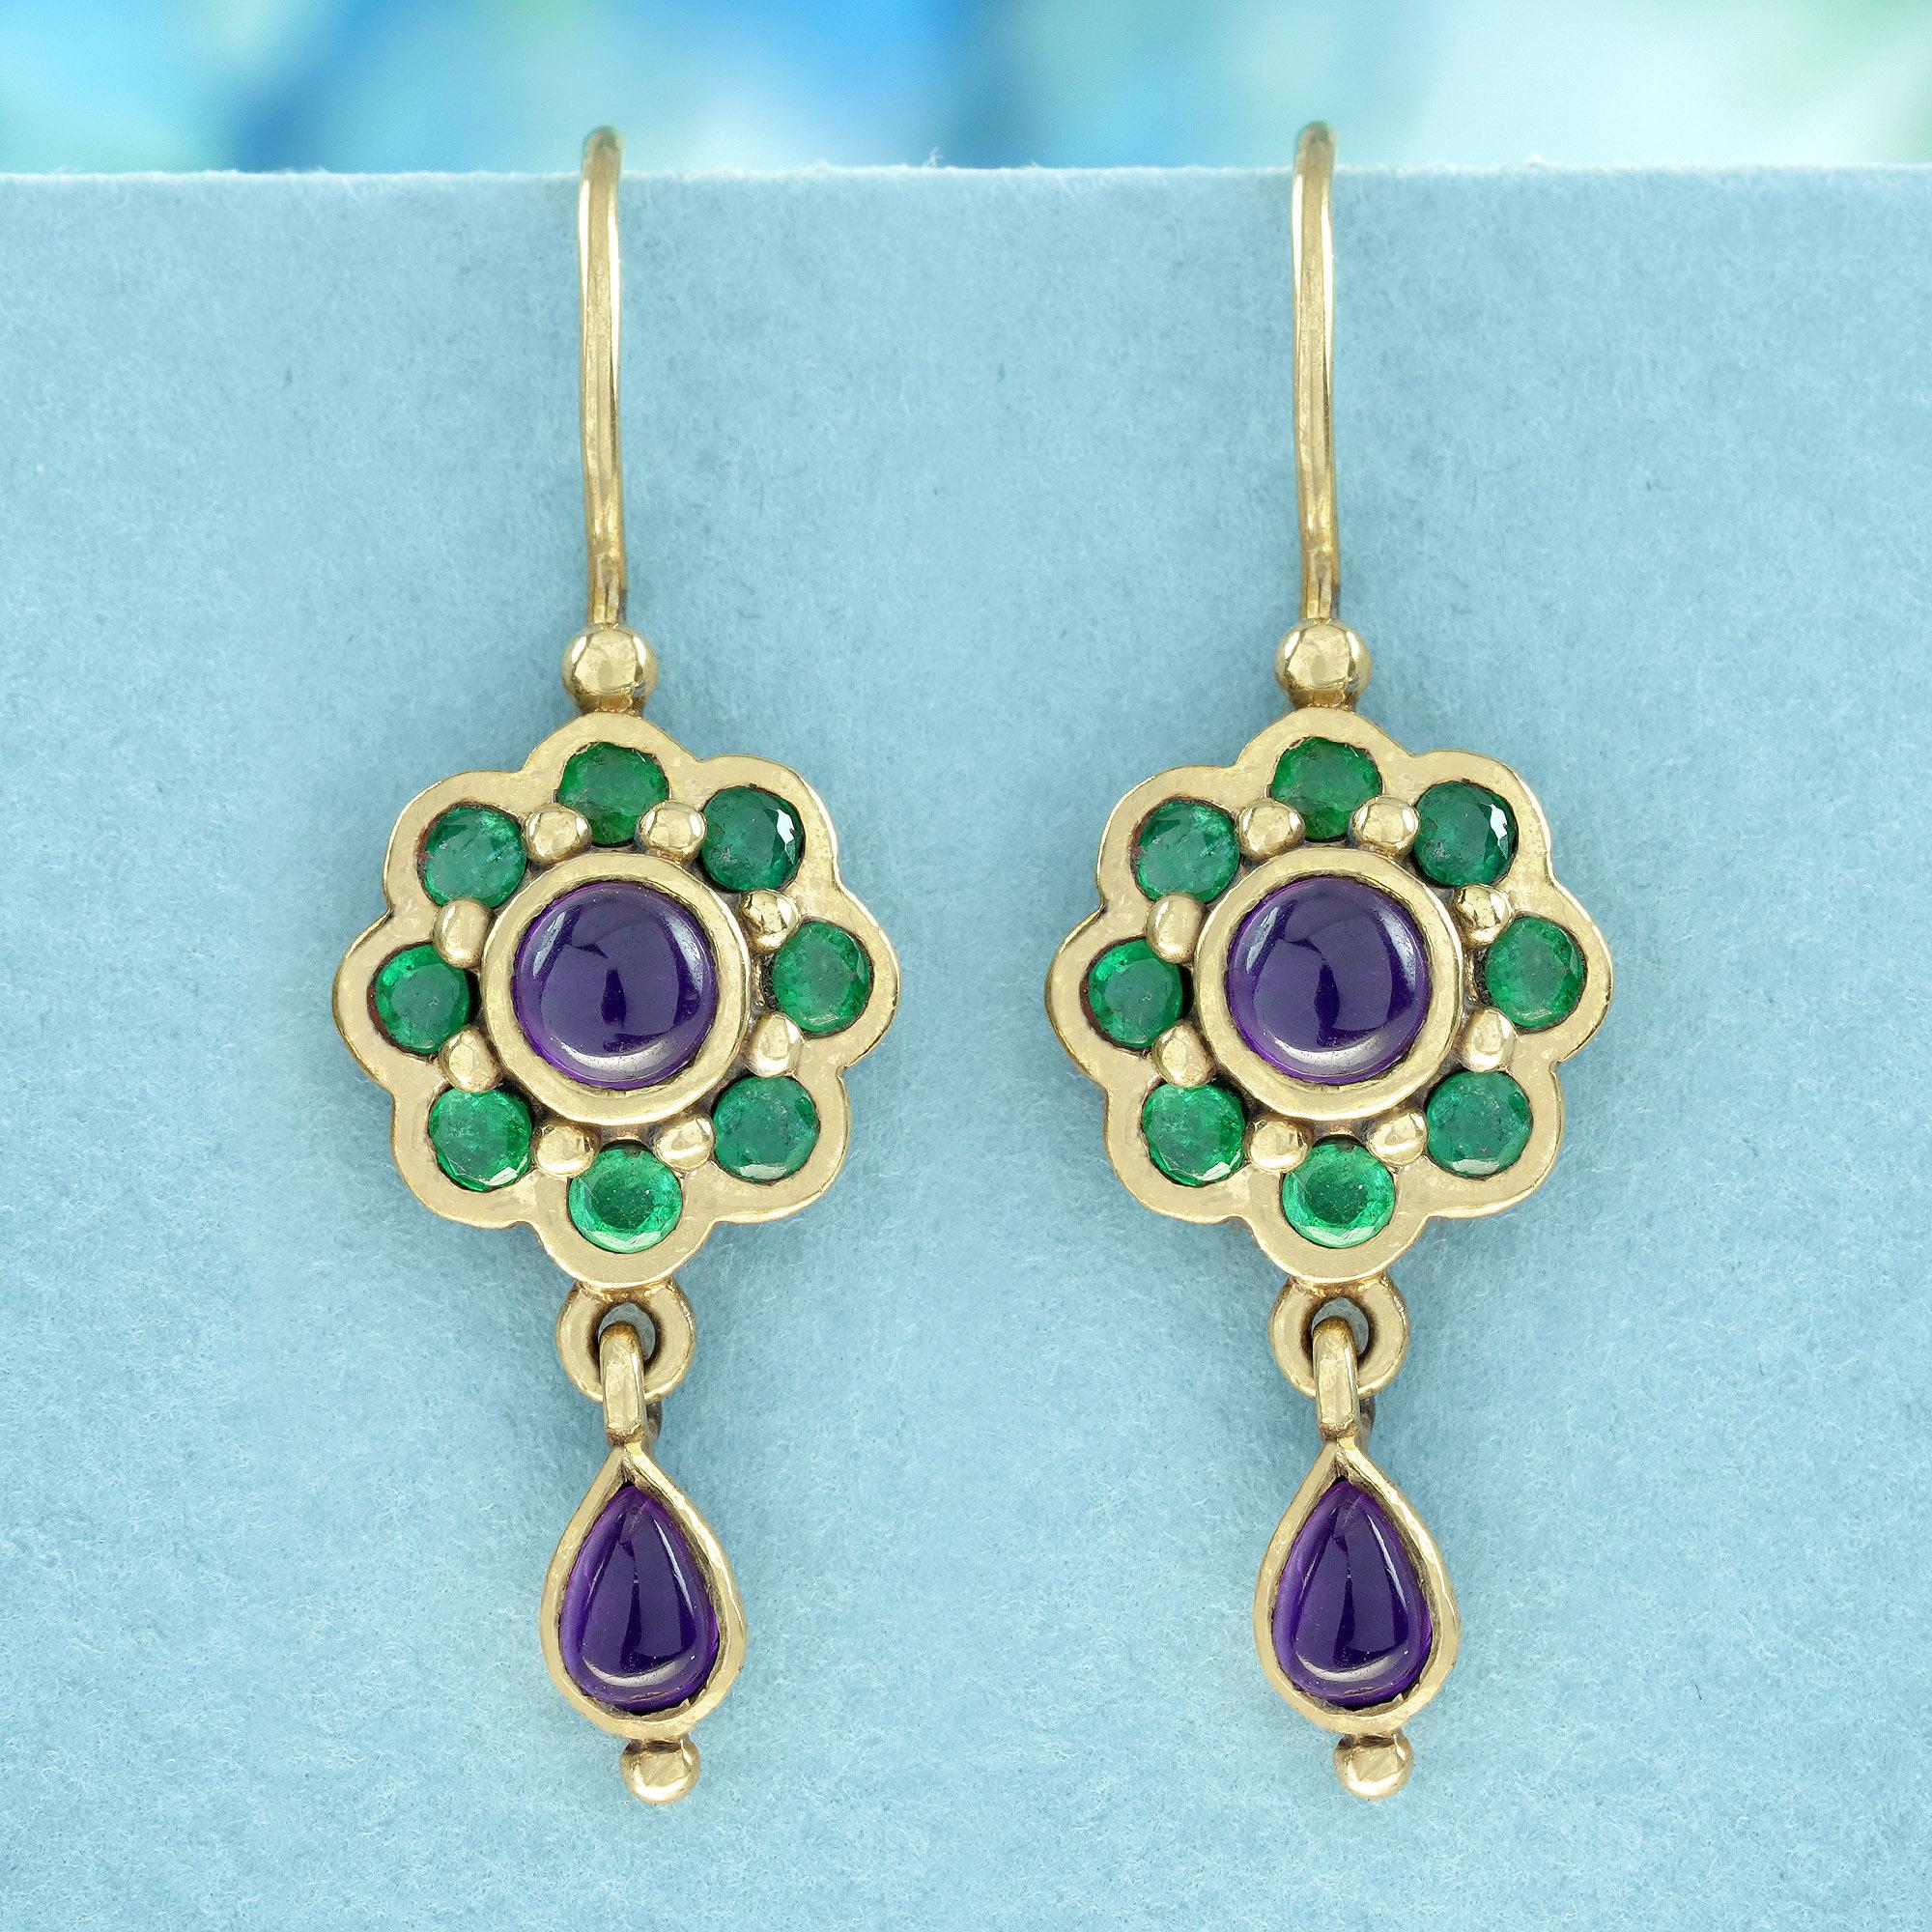 Enter the lavish realm of vintage elegance with these stunning earrings, embodying opulence through elaborate floral and nature-inspired patterns. Each earring showcases a captivating cluster design, with a central round purple amethyst encircled by